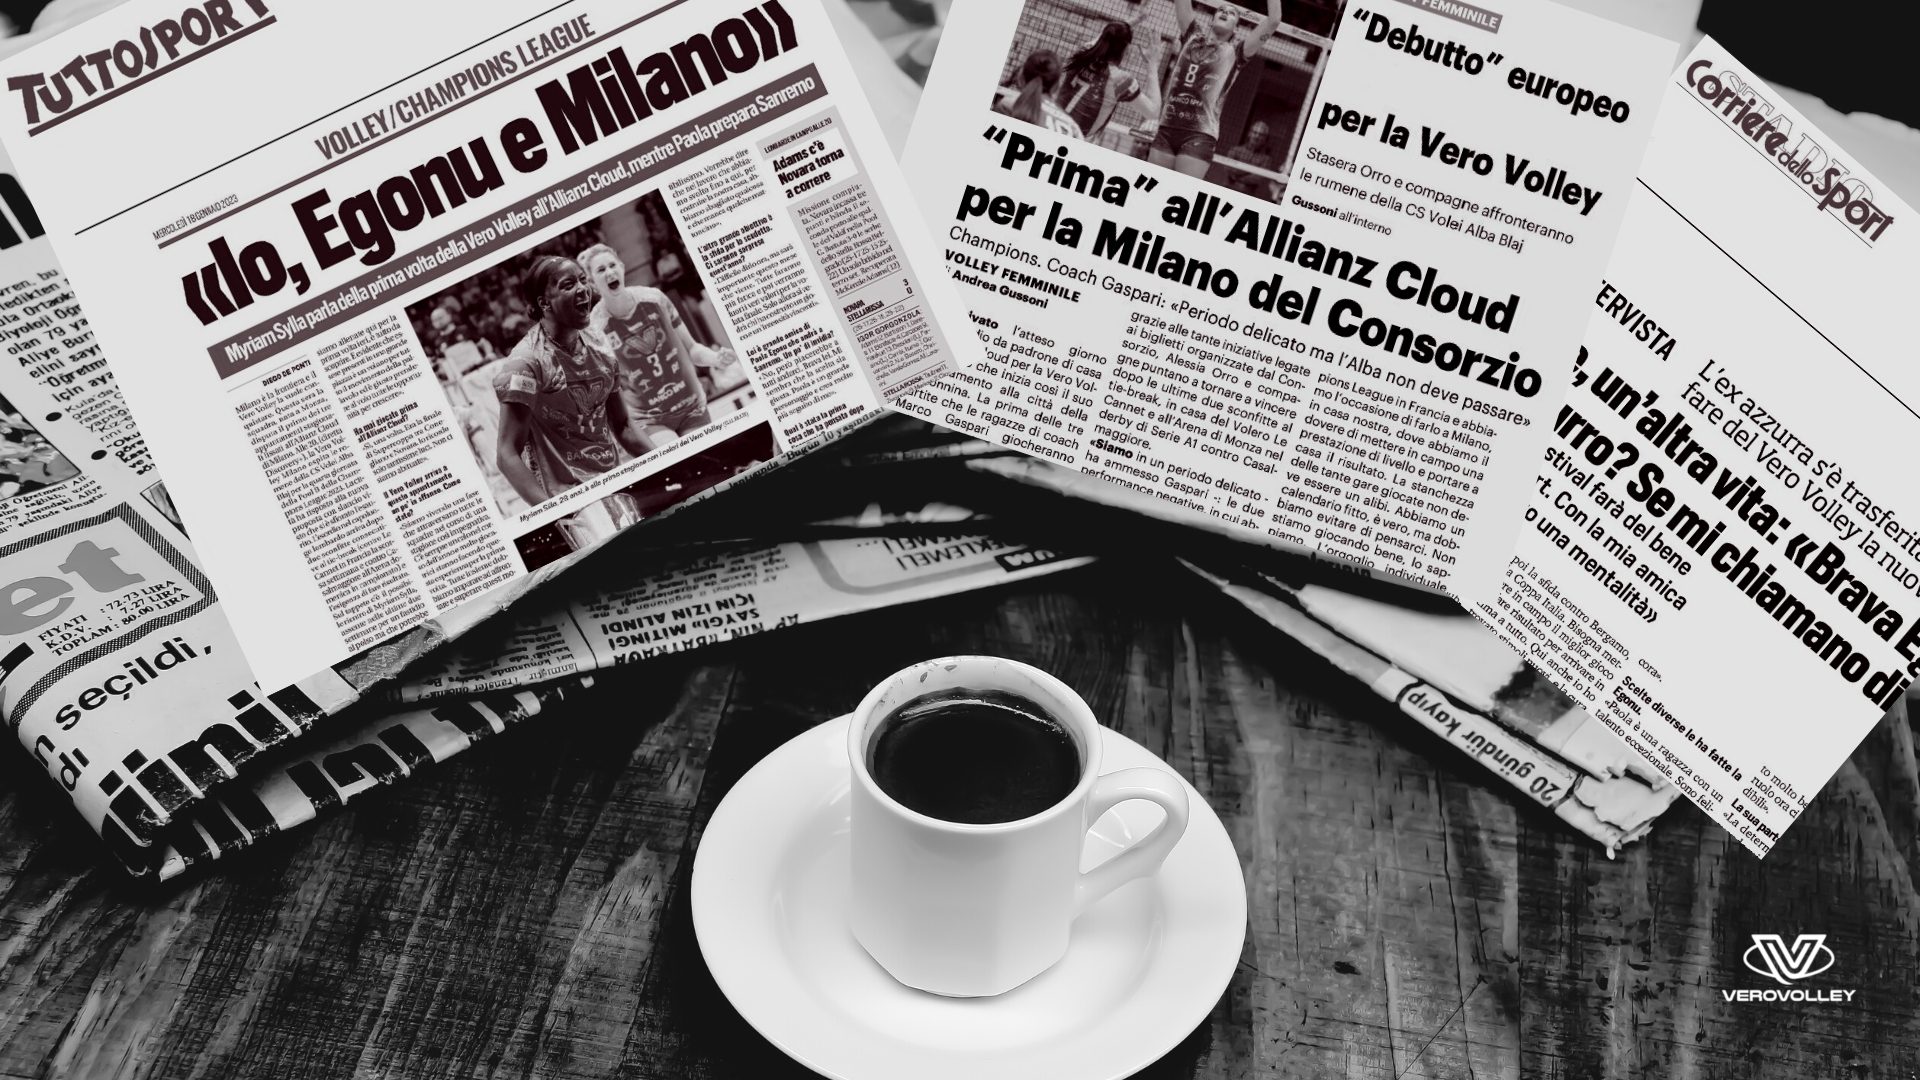 Morning news. Black and white photo with newspapers and coffee Instagram post (1920 × 1080 px)